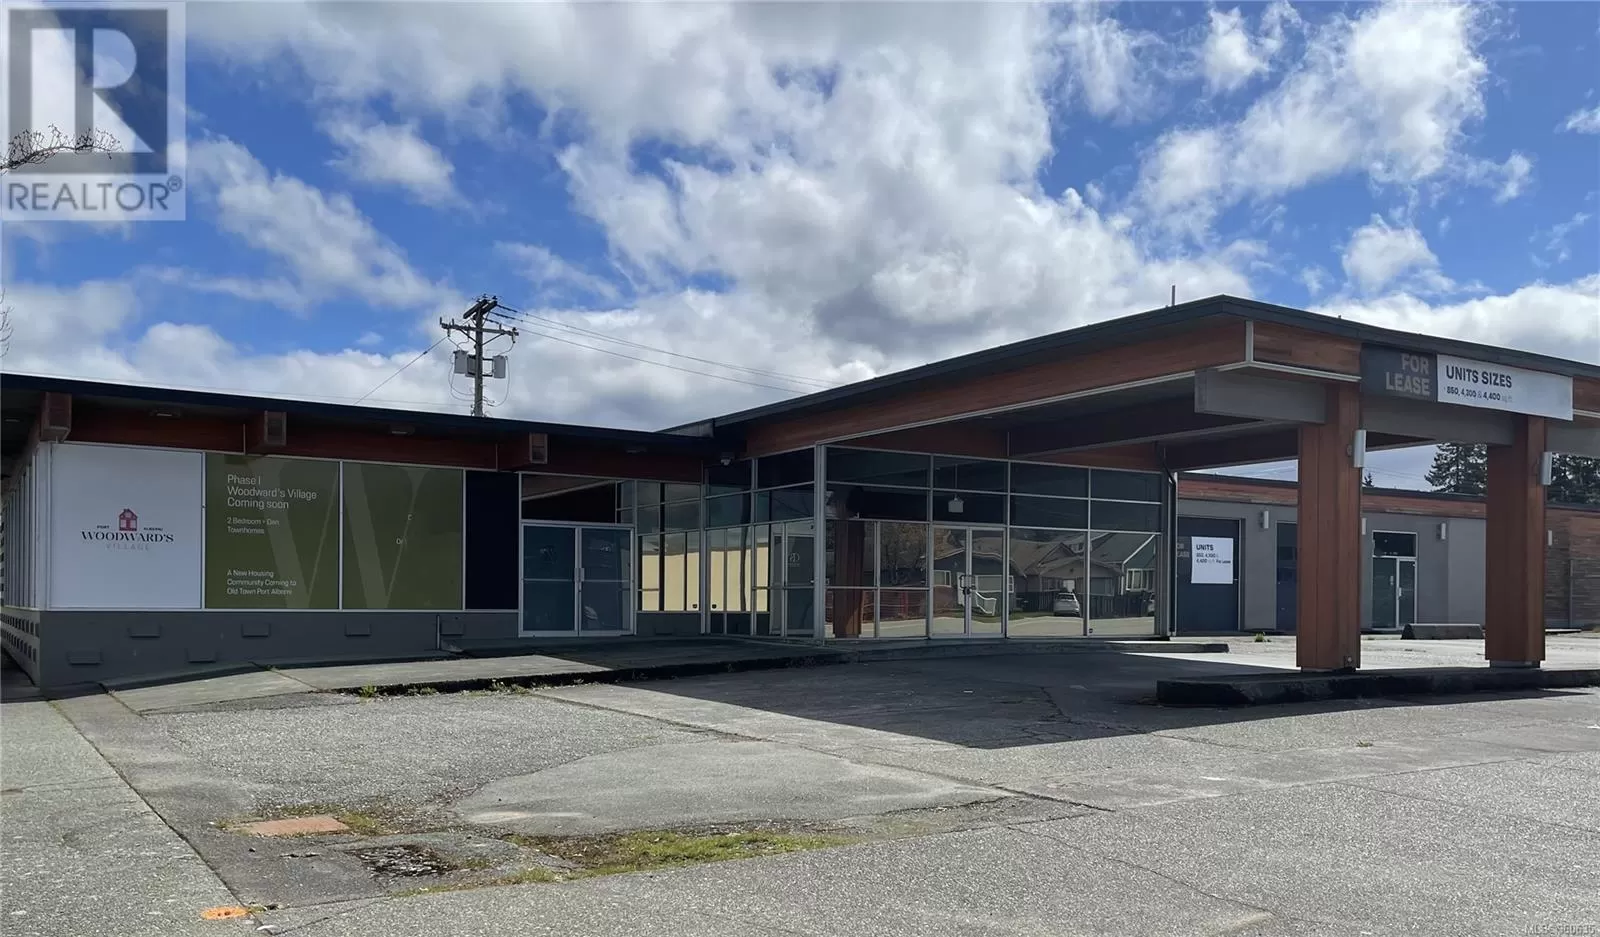 Offices for rent: C 2889 3rd Ave, Port Alberni, British Columbia V9Y 2A9